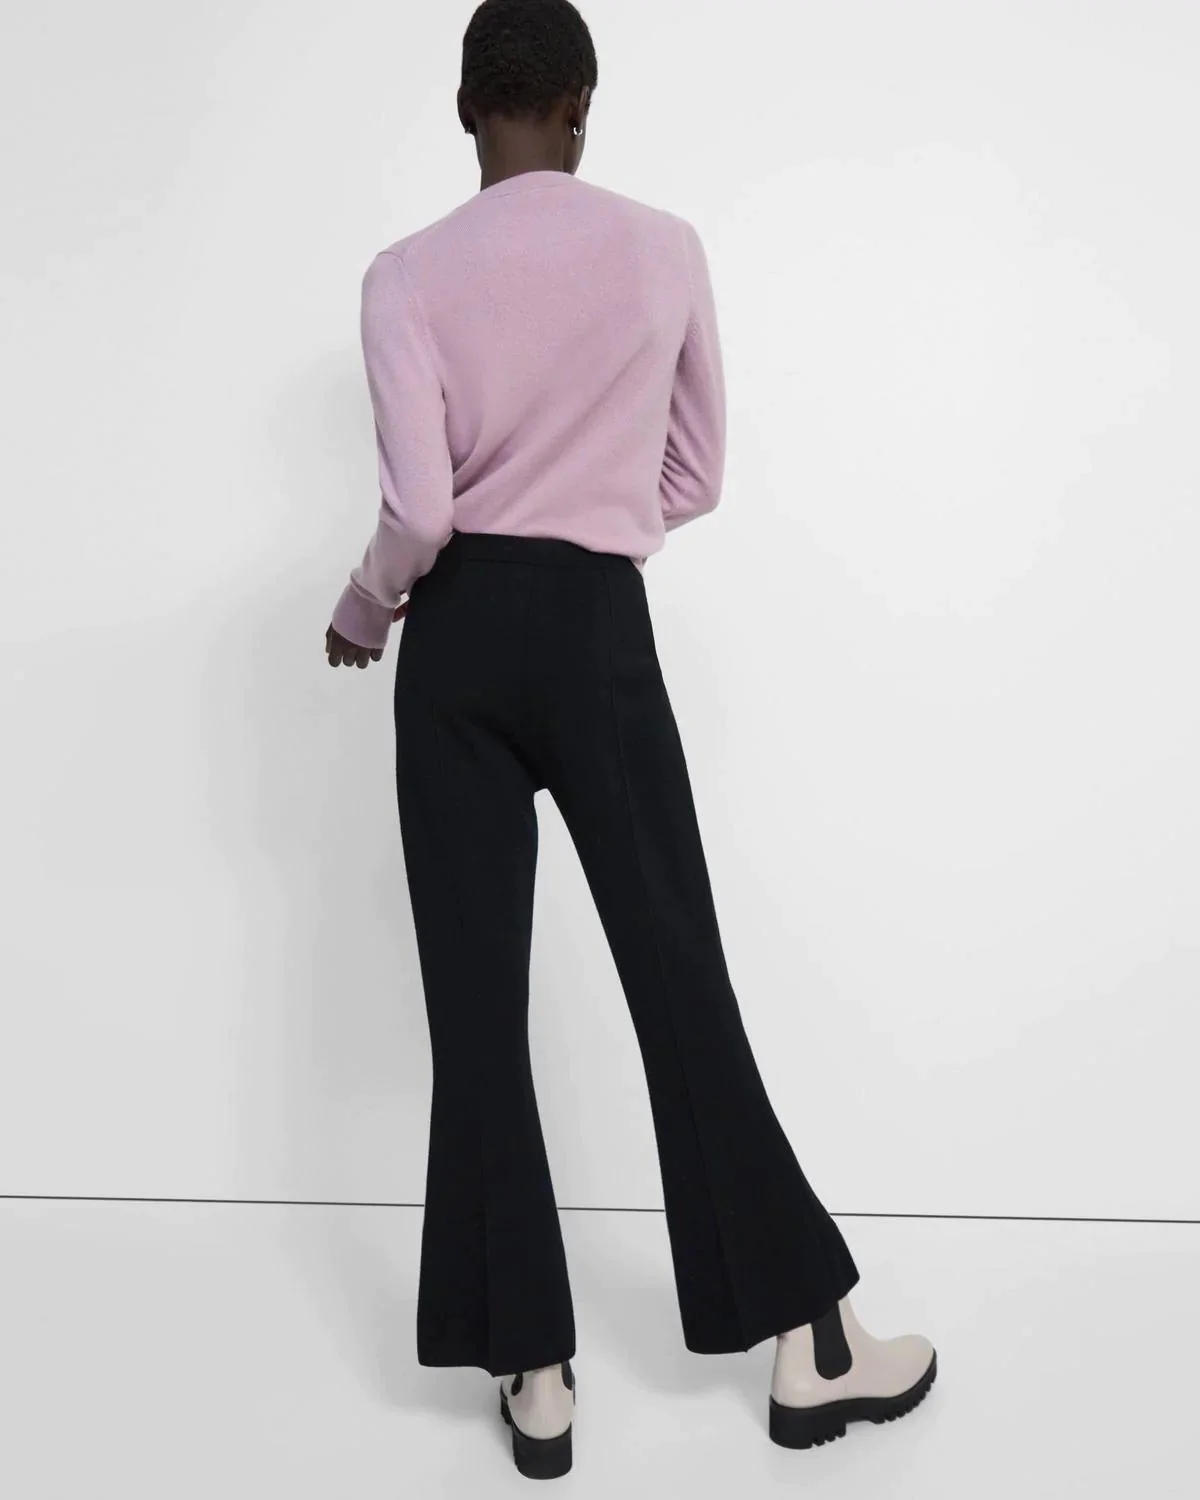 Theory Flare Pant in Empire Wool, Black